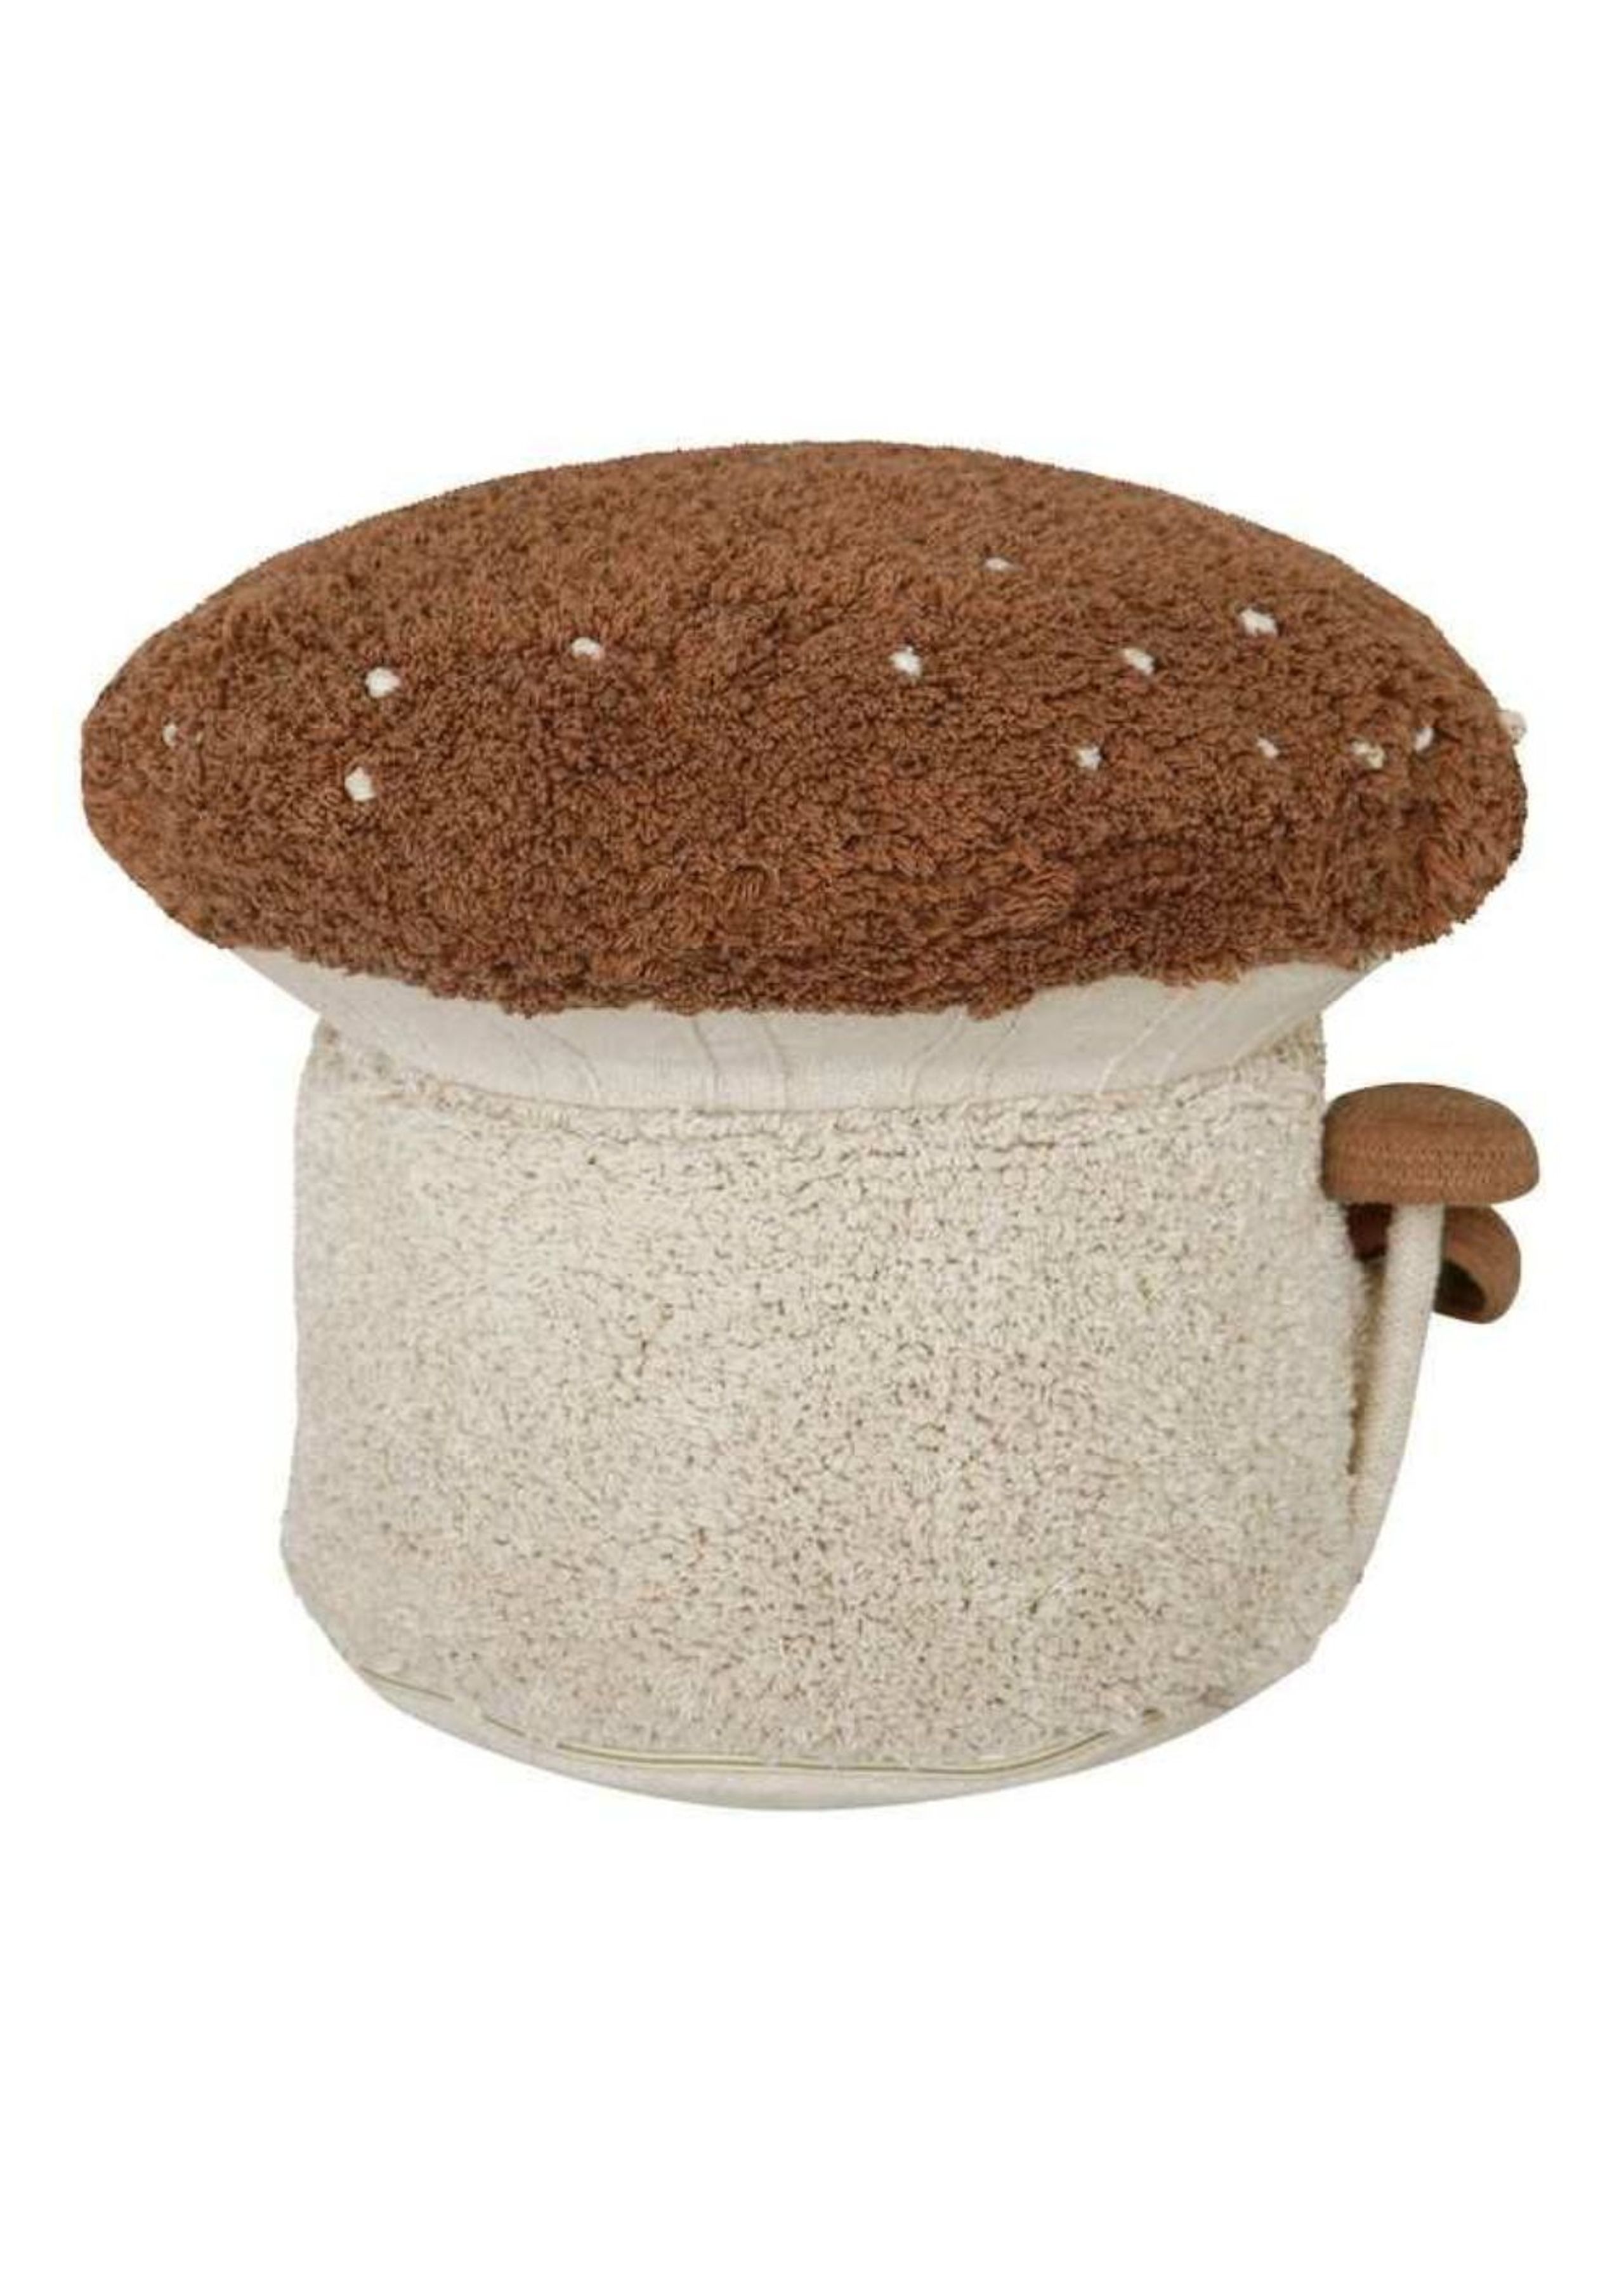 Lorena Canals - Kinder Pouf - Pouf Boletus - Toffee, Natural